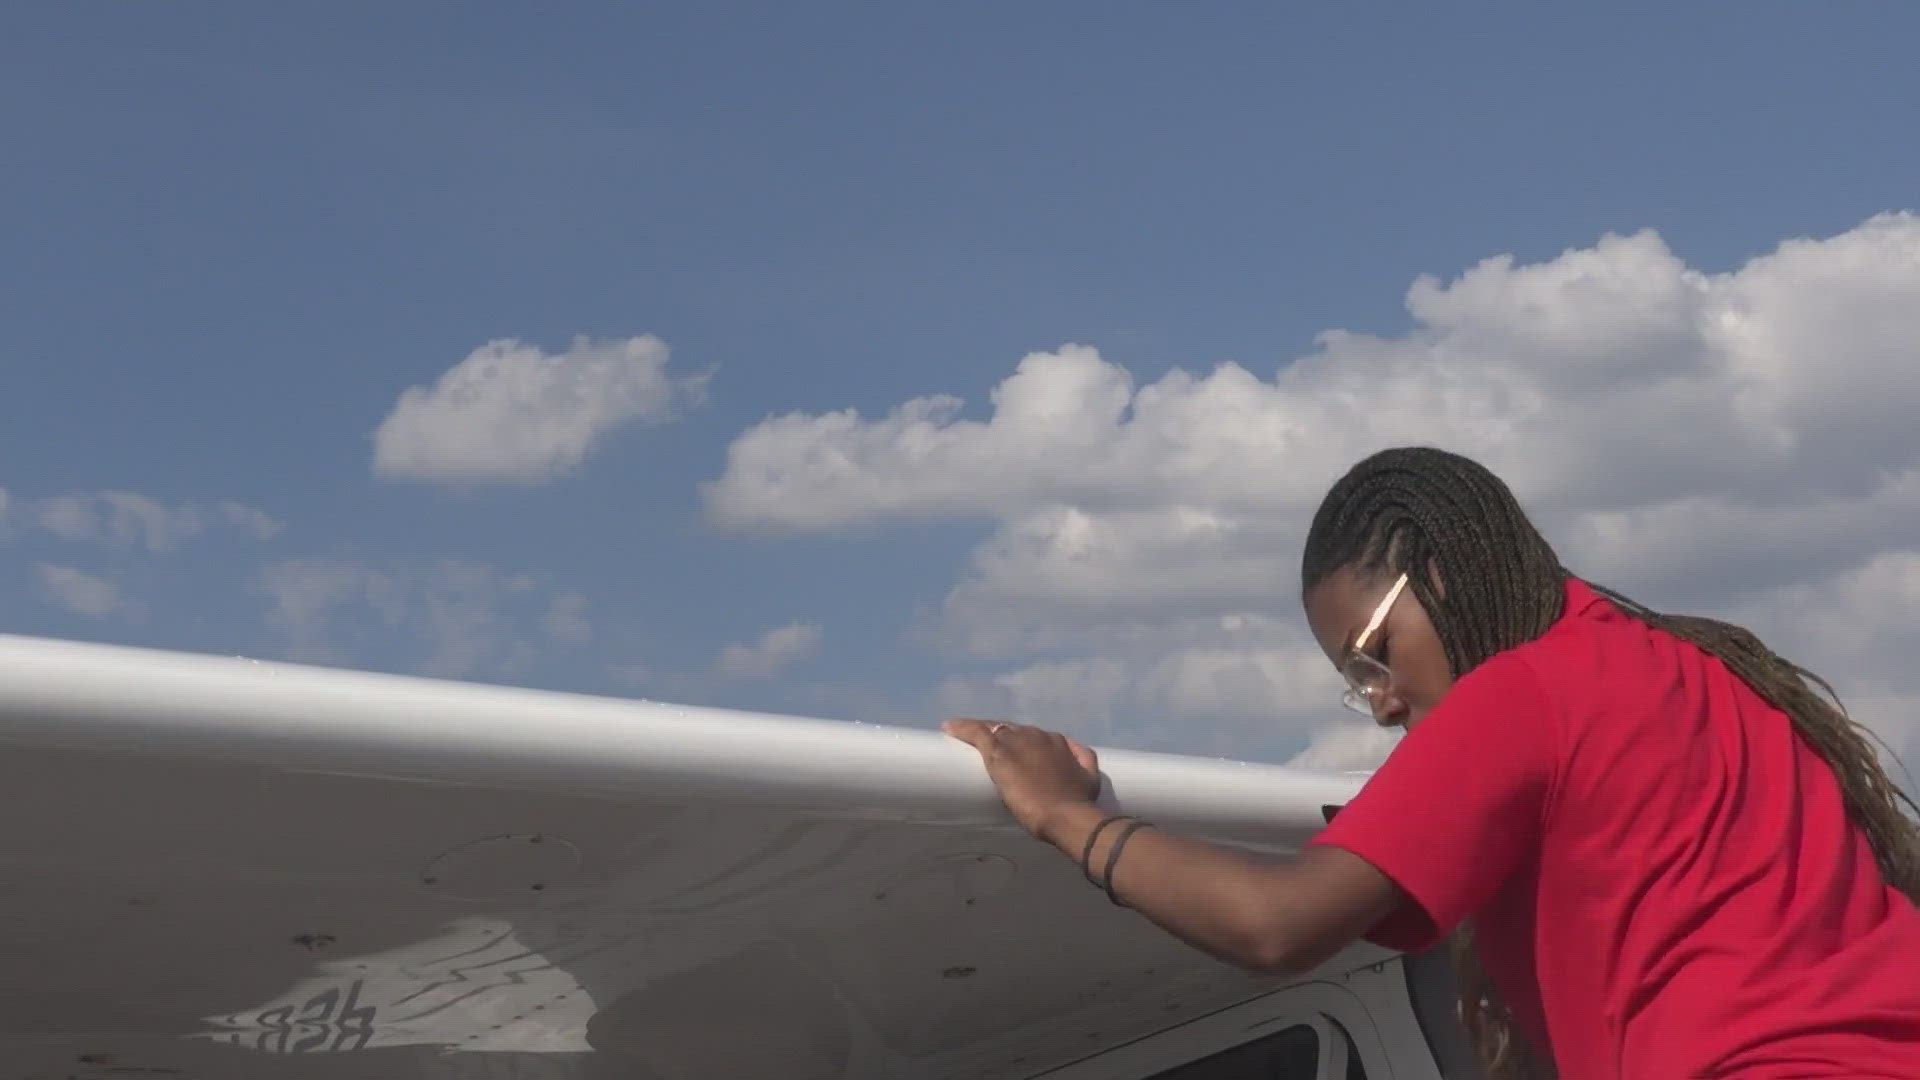 Six students from the Ferguson-Florissant School District will participate in the kick-off ceremony Thursday. It's the start of the six-week program to learn to fly.